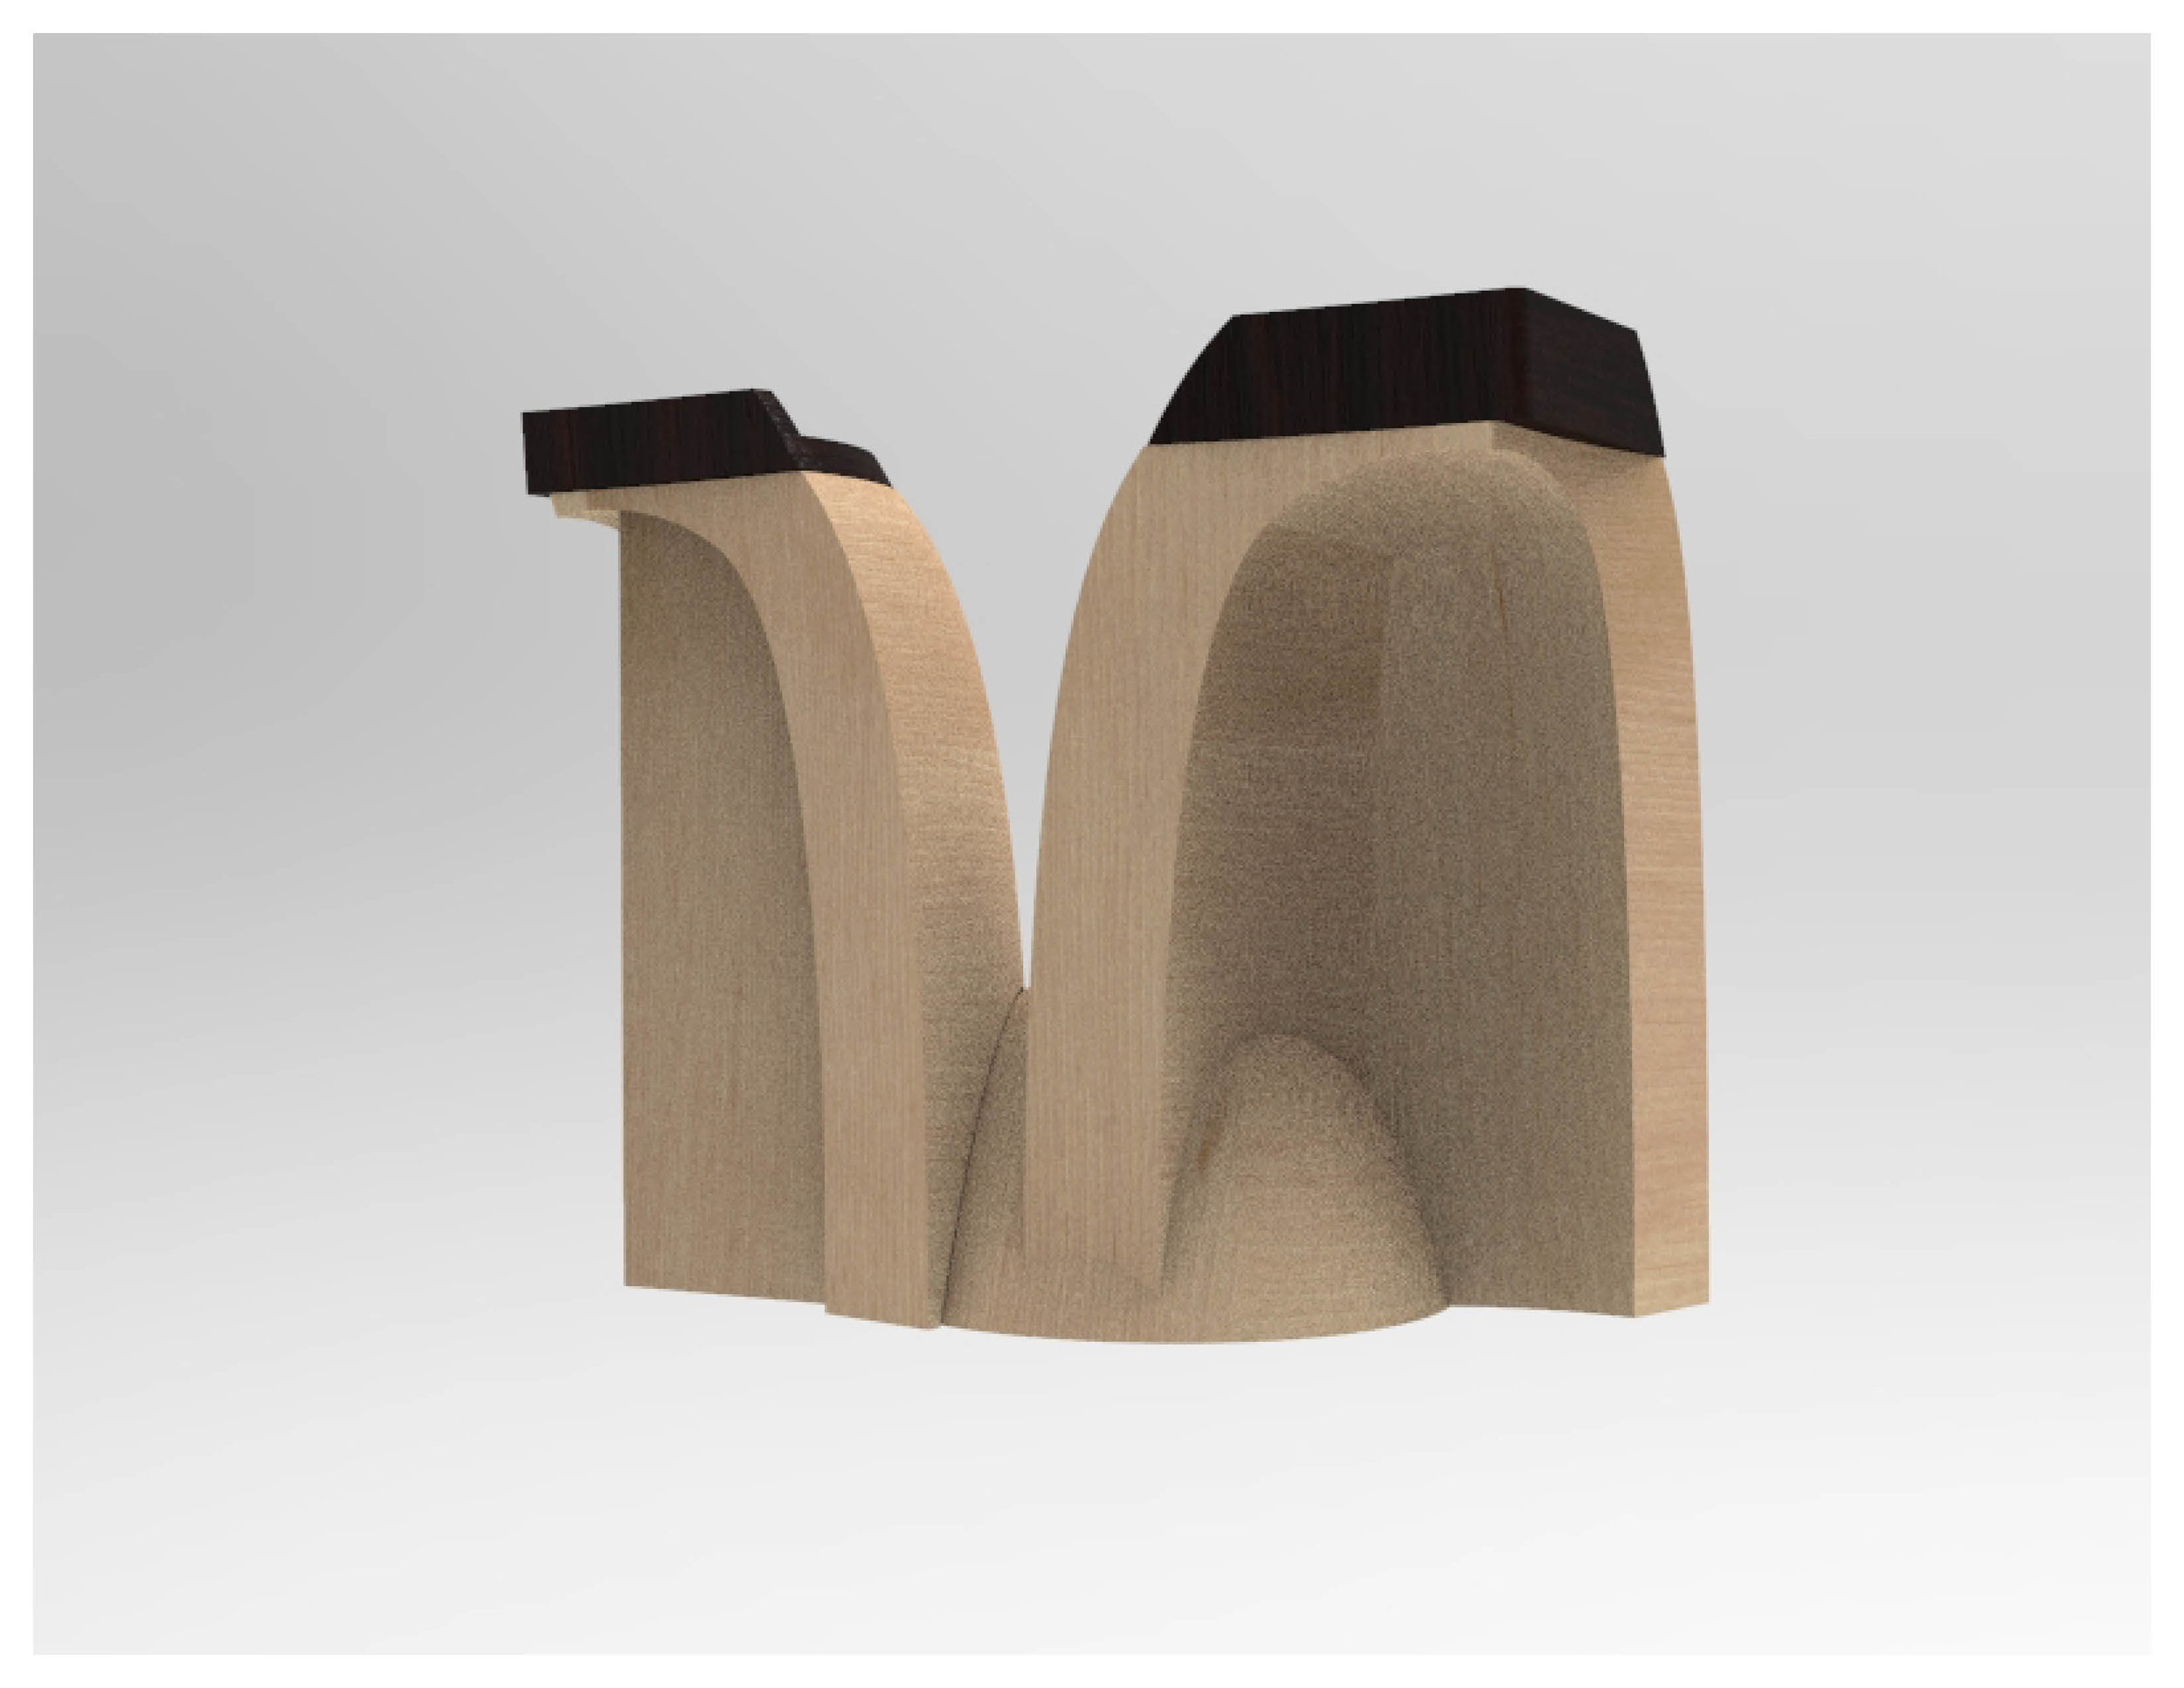 Stool Concept 3: Perspective View 4 (Constructed)